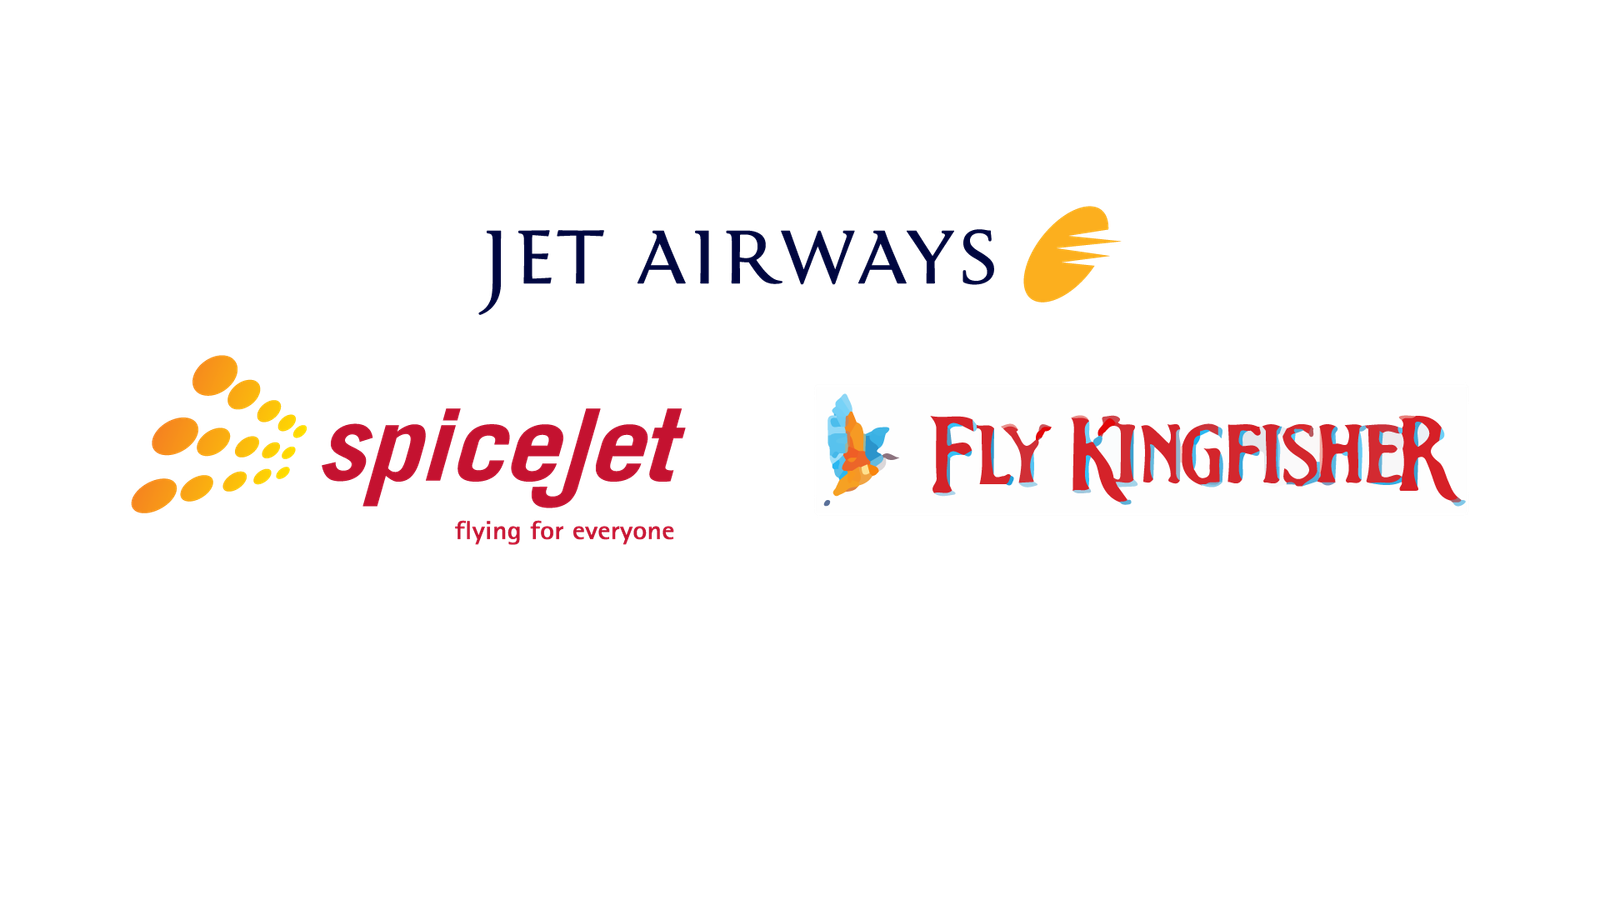 airlines jet airways spicejet kingfisher